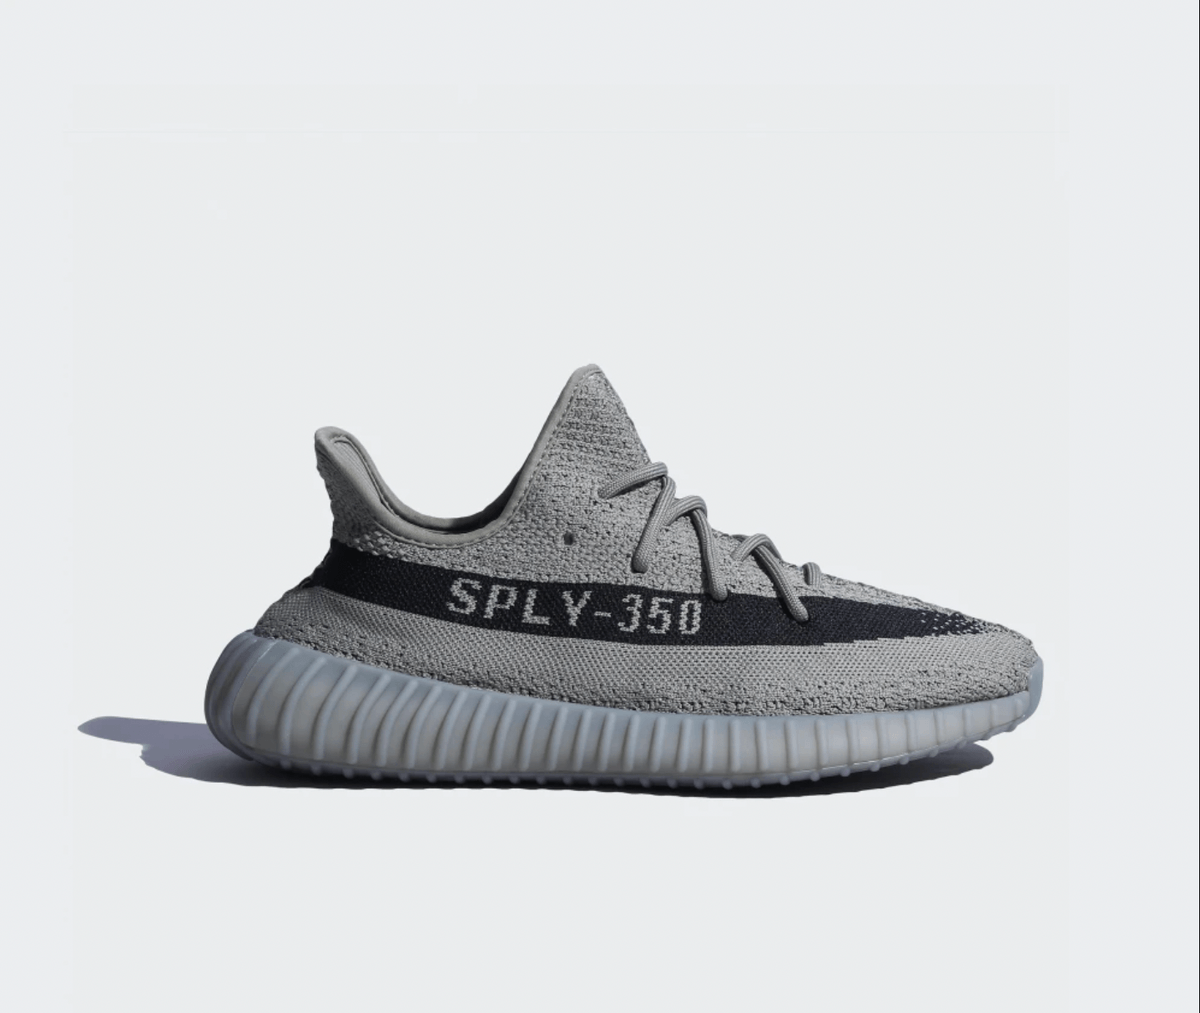 Adidas Will Release Their First 350 After Ending Their YEEZY Partnership In Granite